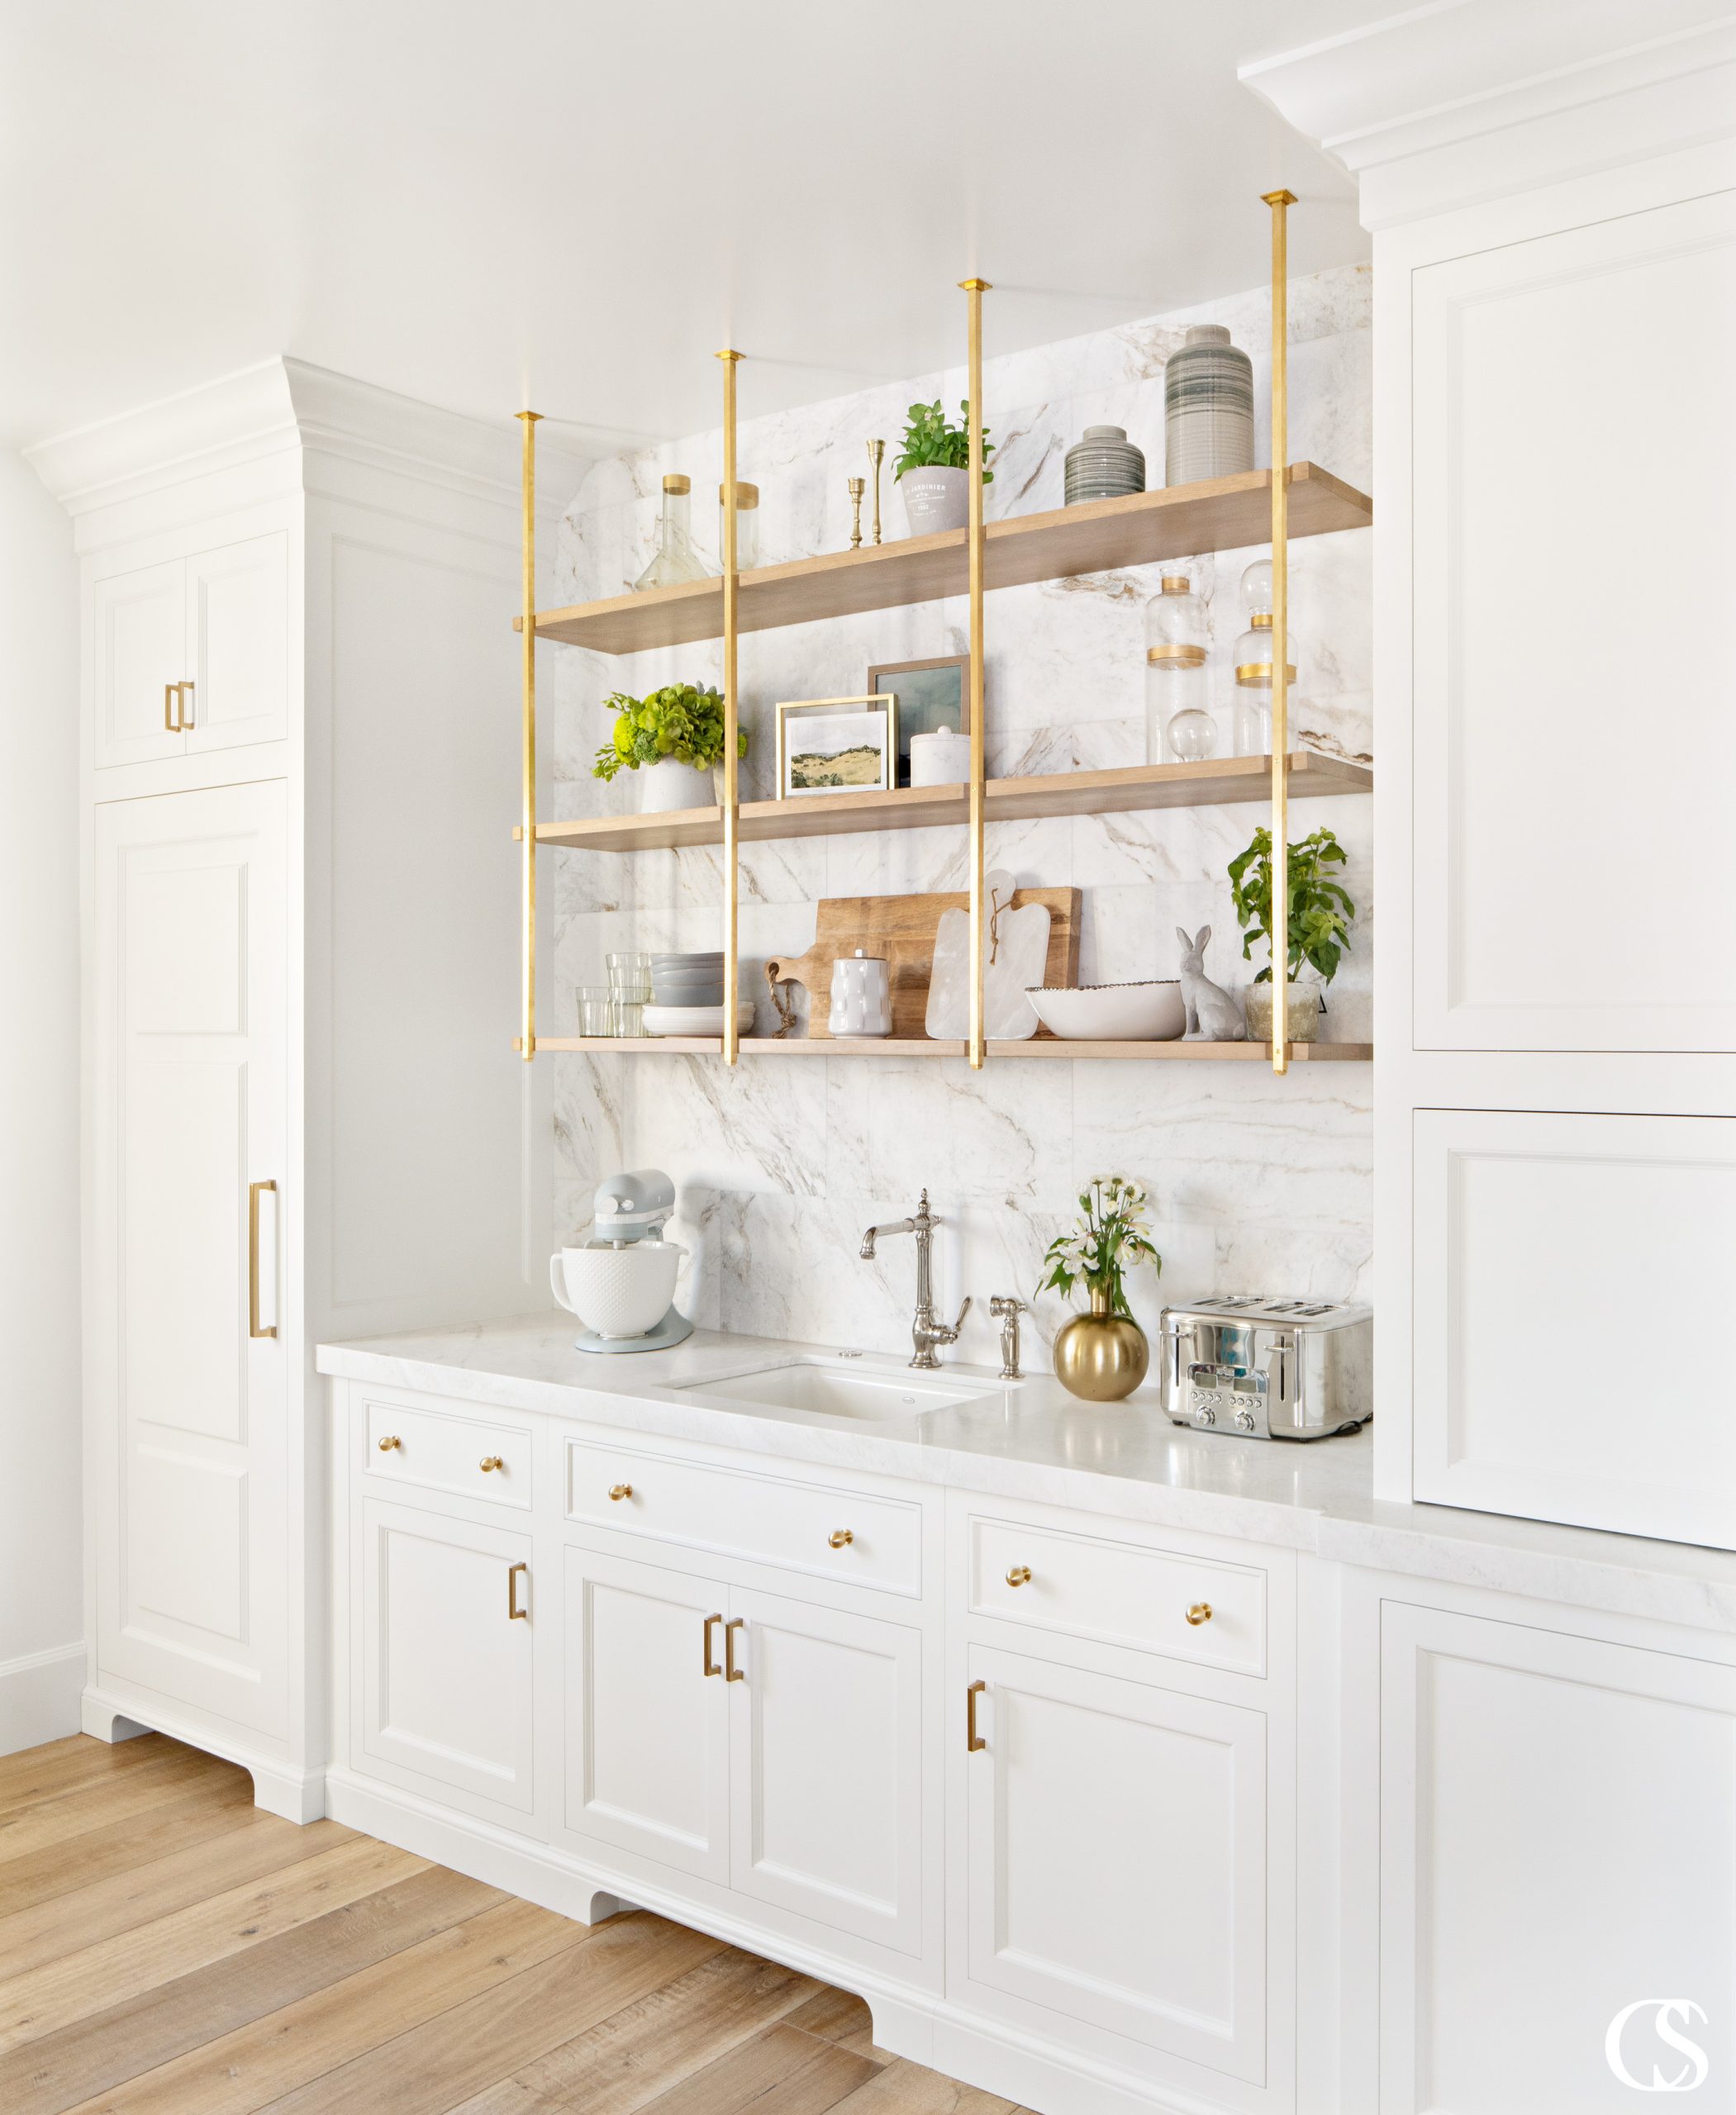 Custom pantry ideas will allow you to make a beautiful space for storing kitchen items that doesn't have to feel like a grocery store stockroom.